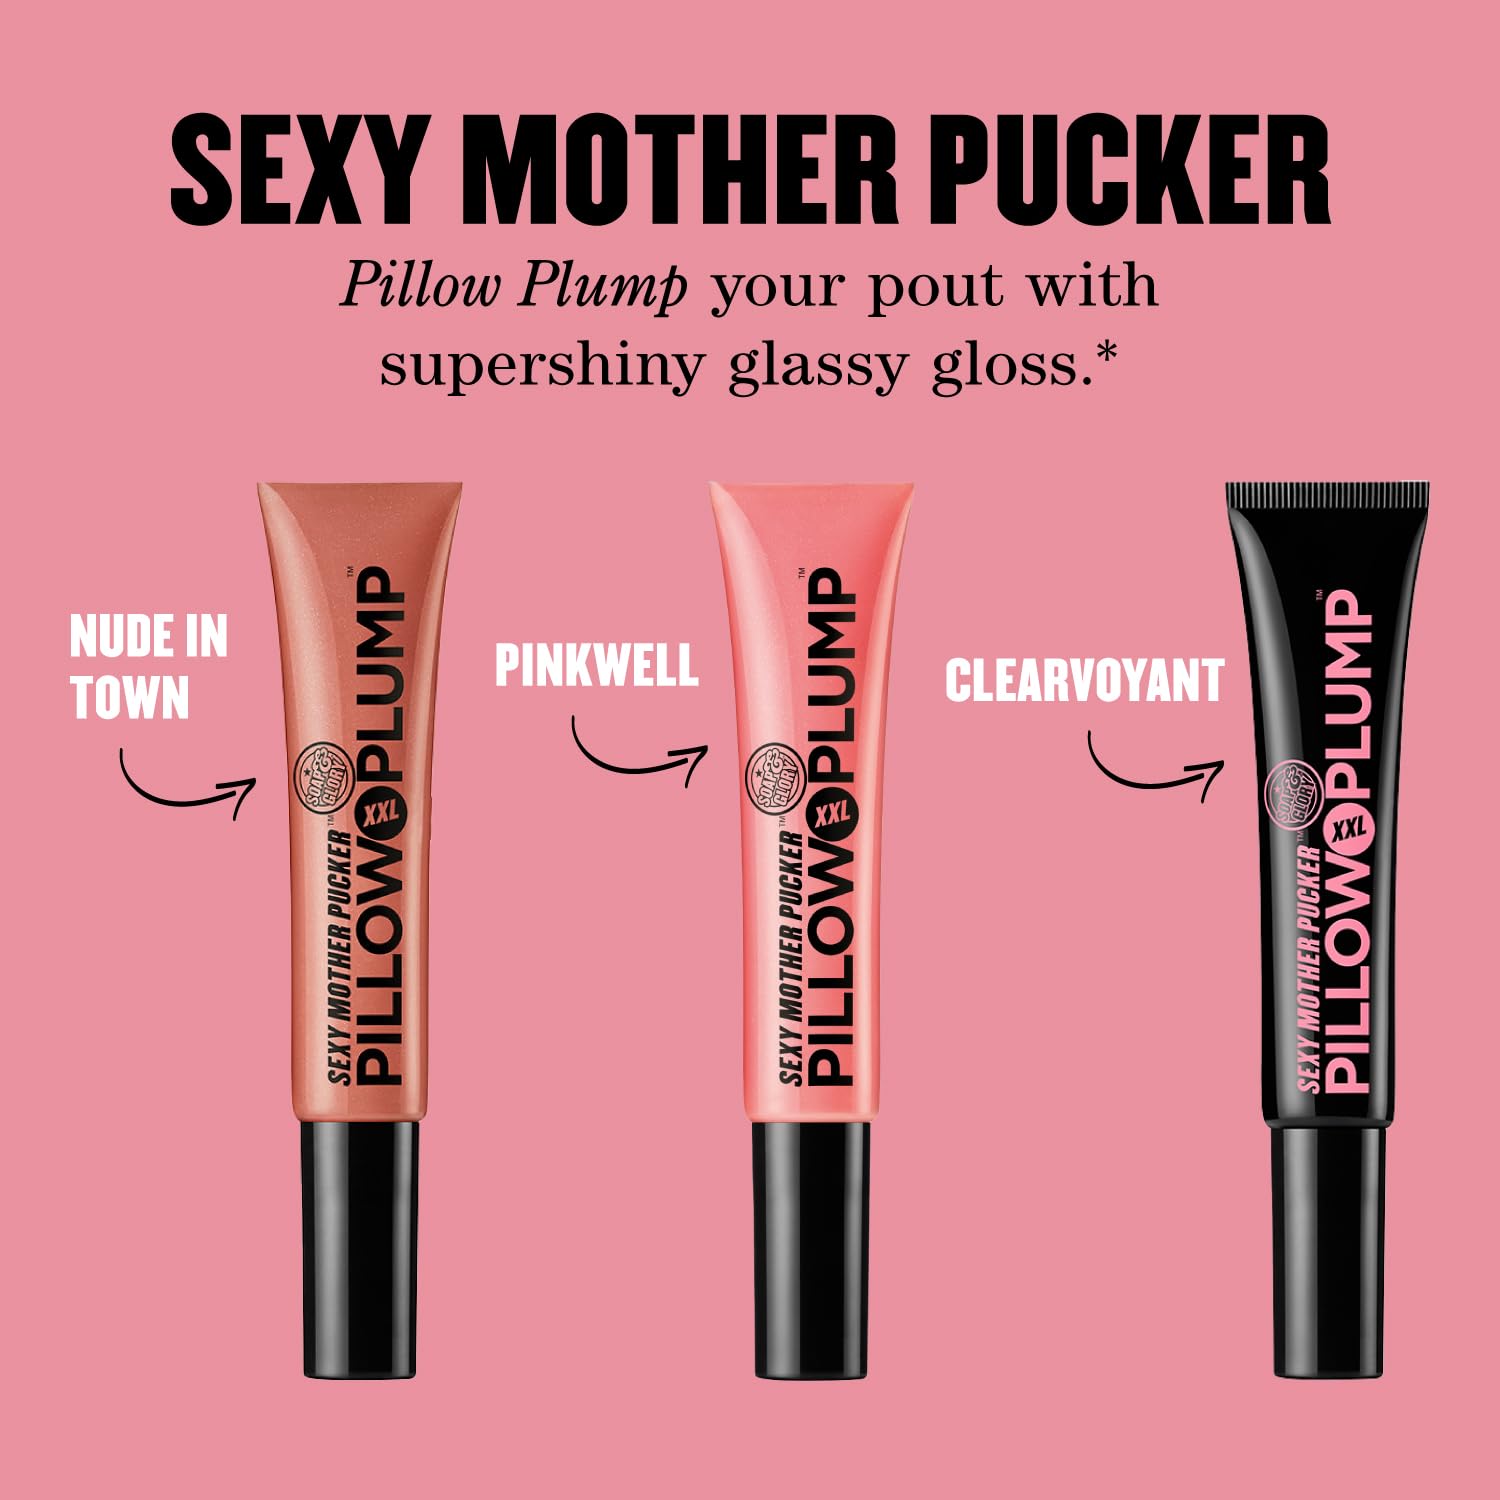 Soap & Glory Sexy Mother Pucker XXL Pillow Plump Lip Gloss - Hydrating, Plumping Lip Gloss for Full, Volumized Lips - Lip Plumper Gloss + Chocolate Orange Scent with Vegan Formula in Pinkwell (10ml)